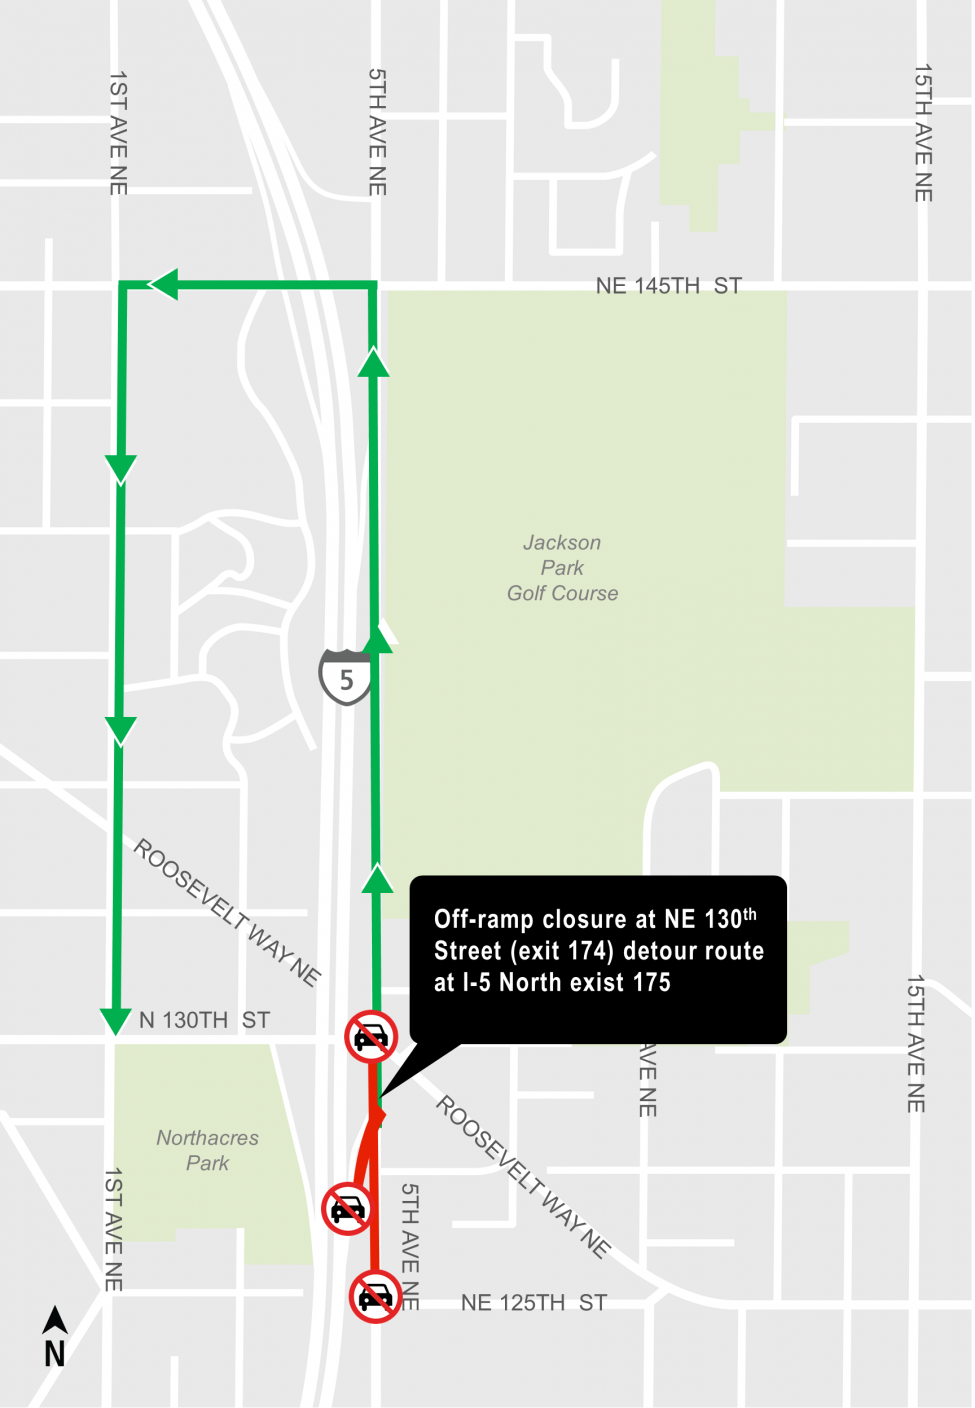 Map showing off-ramp closure at Northeast 130th Street and its detour.